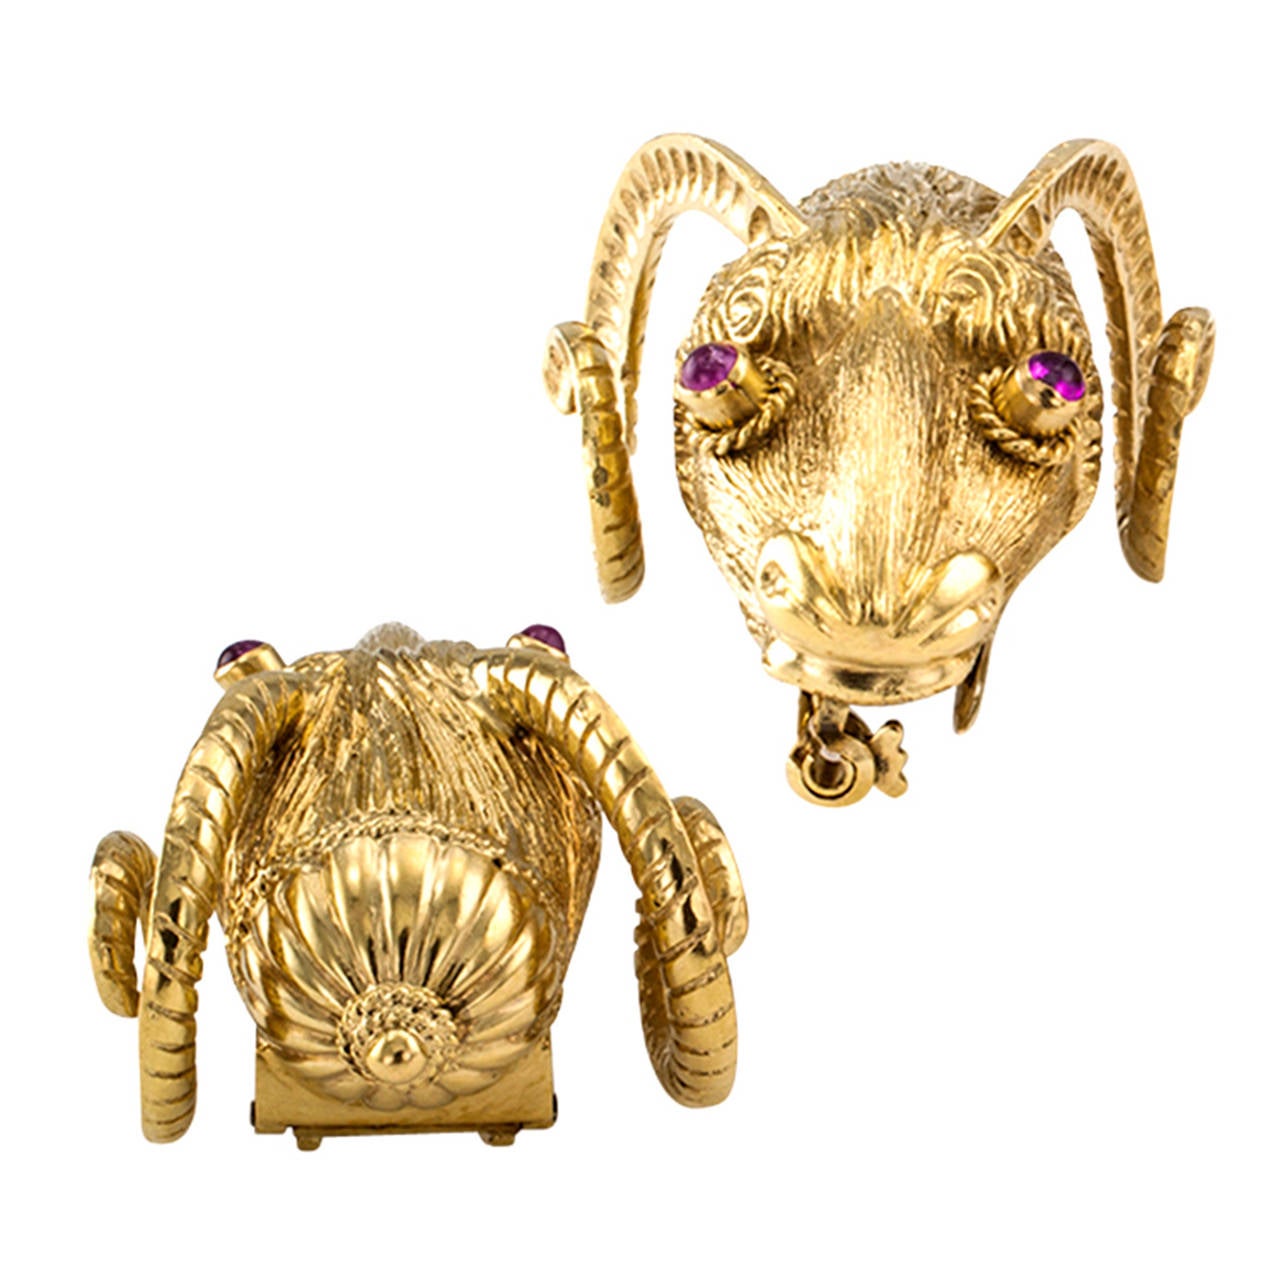 A Pair of Ram's Head Clip/Brooch 

Fashionable women have always maintained a love affair with clip brooches and the versatility that they add to a jewelry wardrobe.  There are so many clever and fashionable ways of wearing them, whether as a